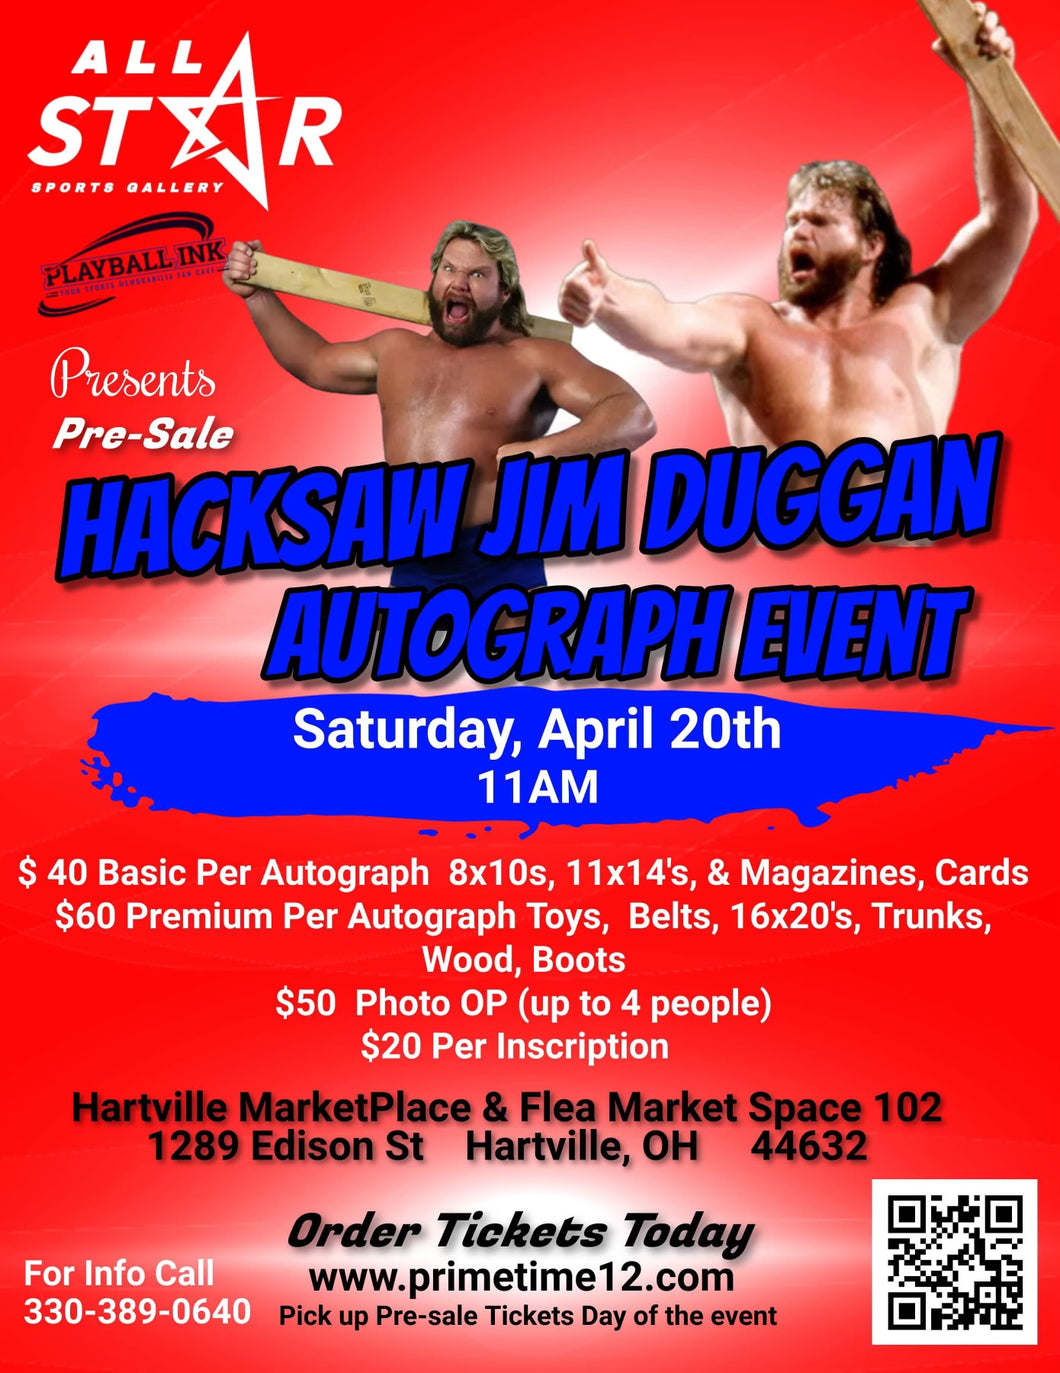 Hacksaw Jim Duggan Pre-Sale for PHOTO OP ticket to have your photo taken with him